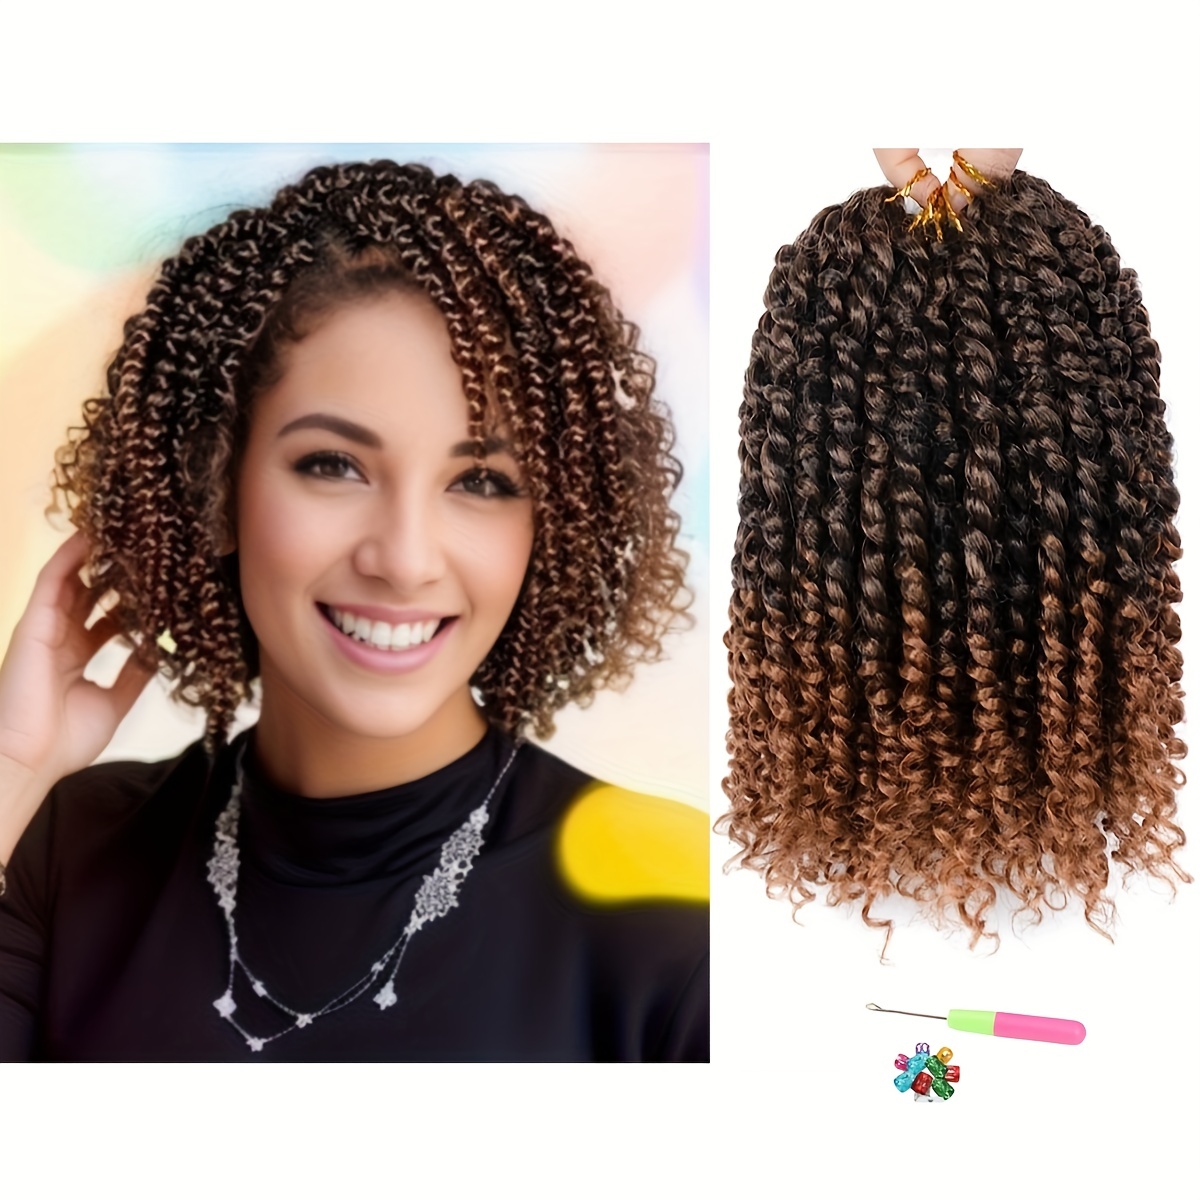 8 Packs Passion Twist Hair 12 Inch Pre-twisted Passion Twist